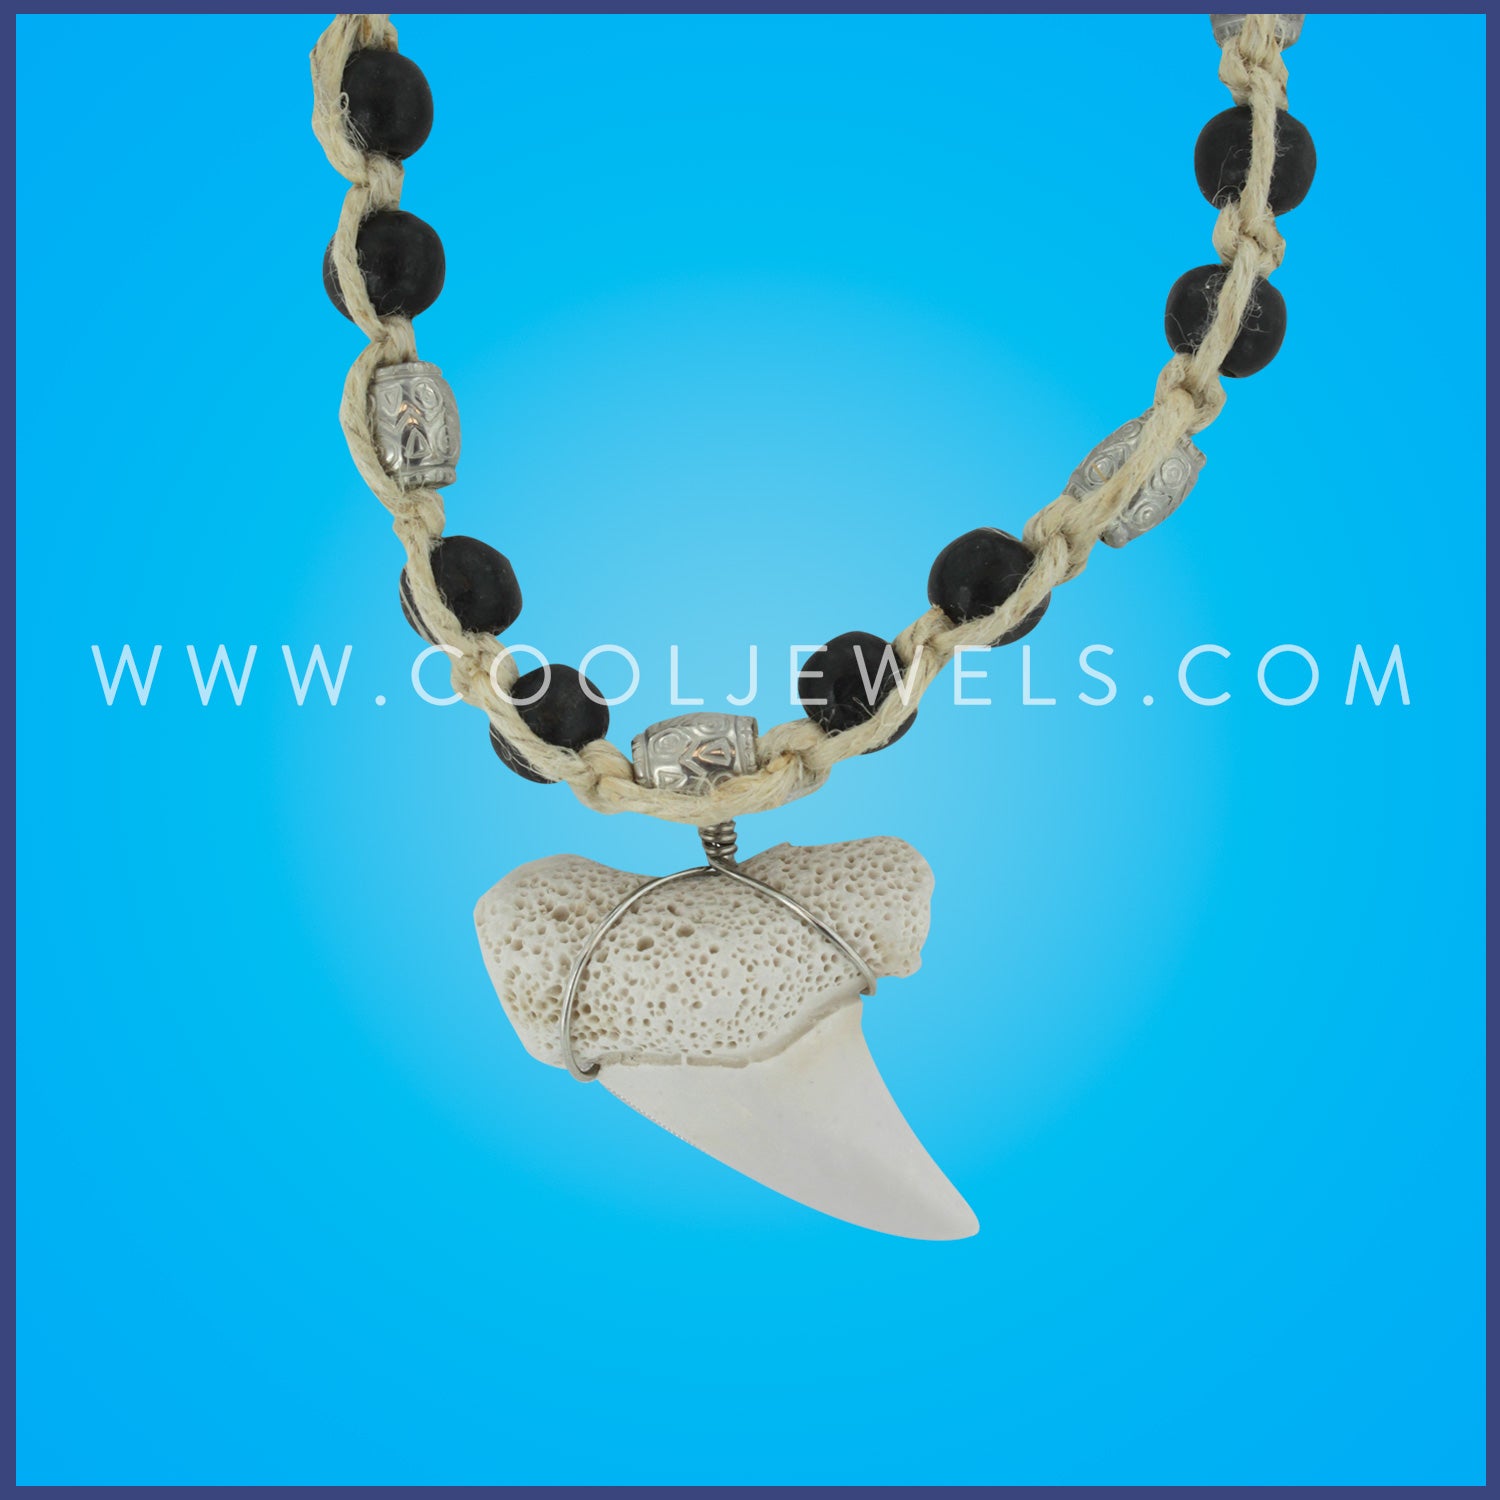 HEMP NECKLACE WITH WOOD BEADS & IMITATION SHARK TOOTH PENDANT - ASSORTED COLORS Comes with assorted shark teeth.